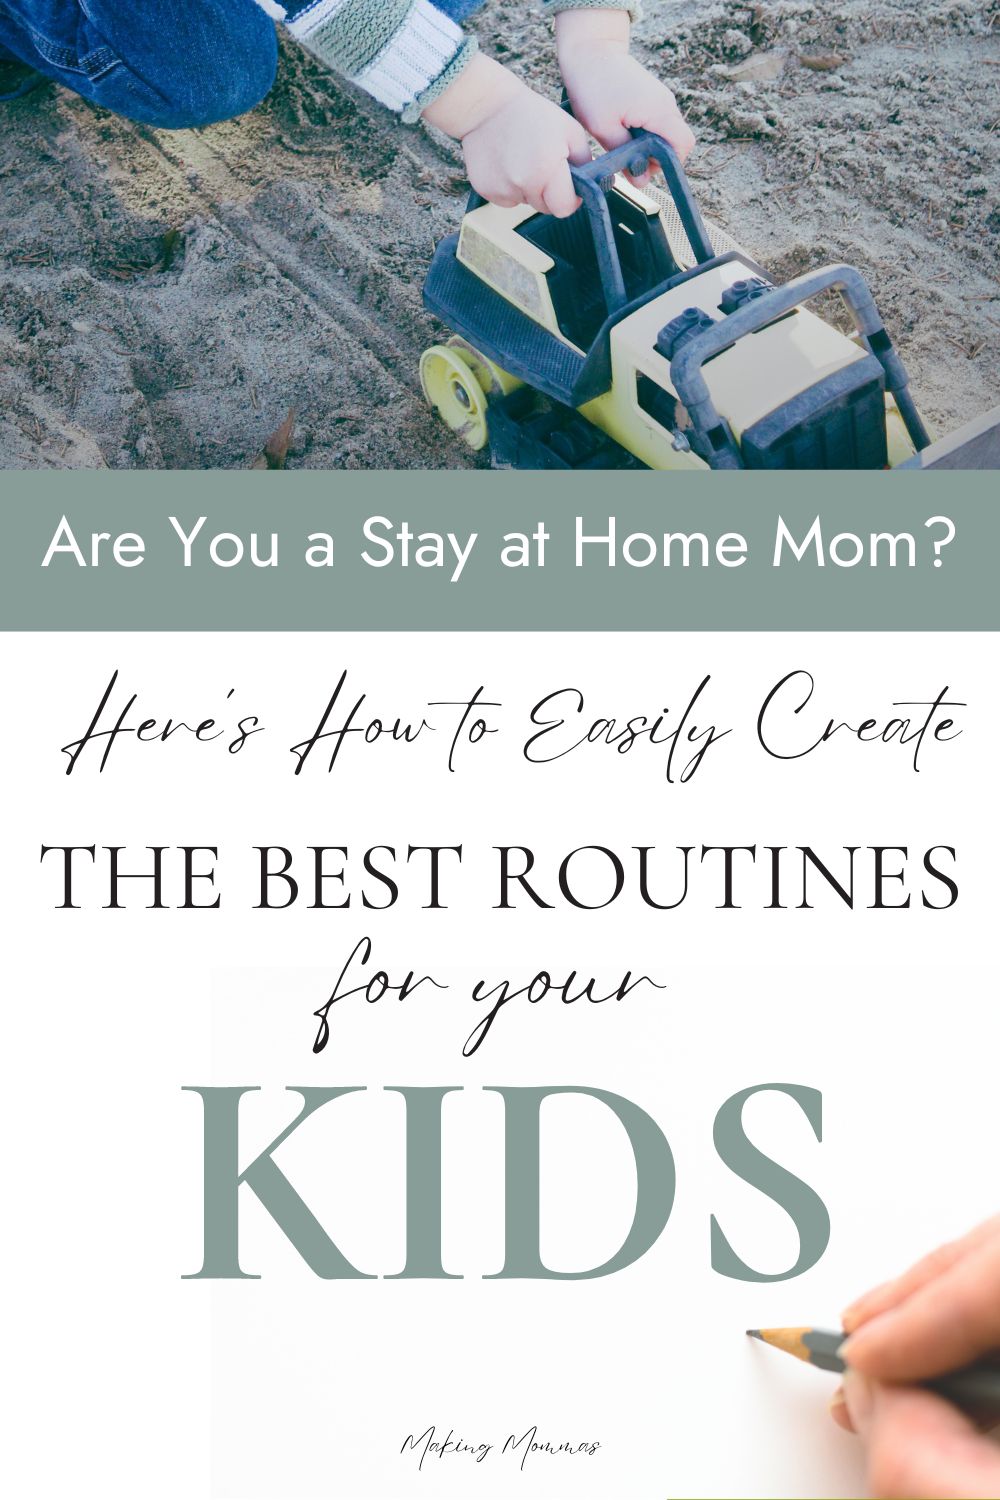 Pin image that reads, "Are you a stay at home mom? Here's how to easily create the best routines for your kids." with an image of a little boy pushing a tractor in the sandbox.